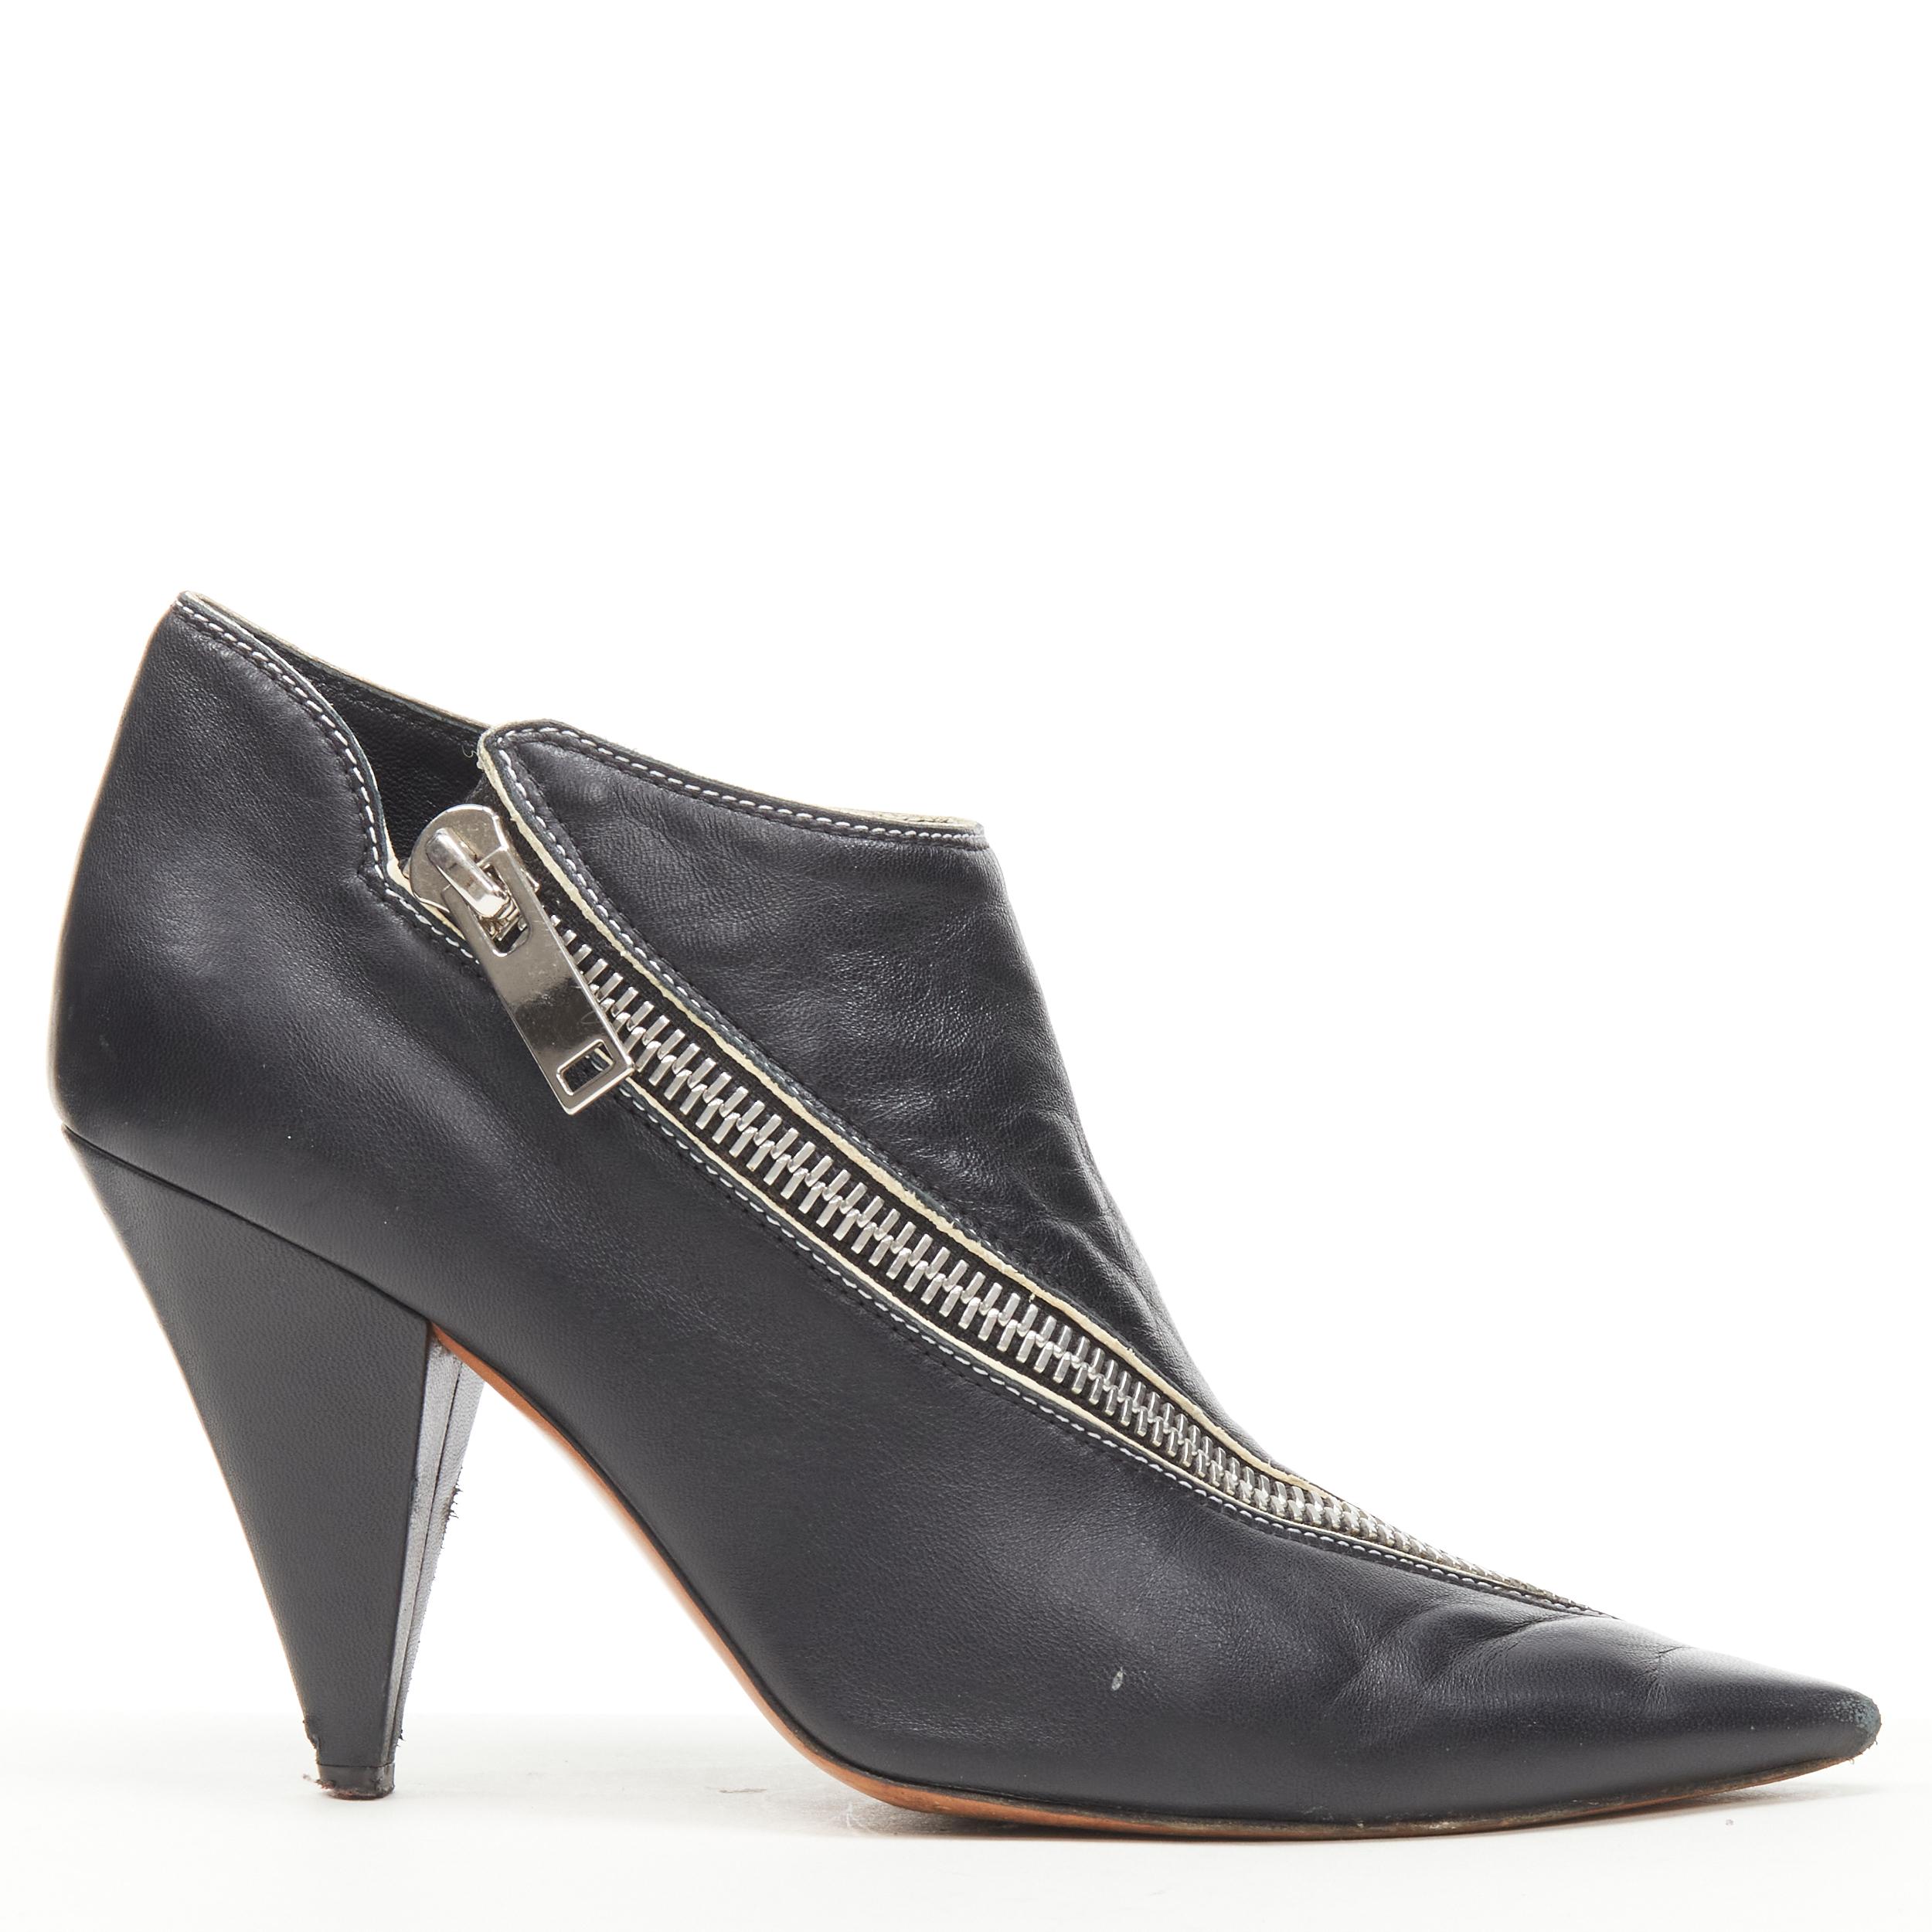 OLD CELINE Phoebe Philo black leather twist silver zip cone heel bootie EU36.5 
Reference: JACG/A00064 
Brand: Celine 
Designer: Phoebe Philo 
Material: Leather 
Color: Black 
Pattern: Solid 
Closure: Zip 
Made in: Italy 

CONDITION: 
Condition: